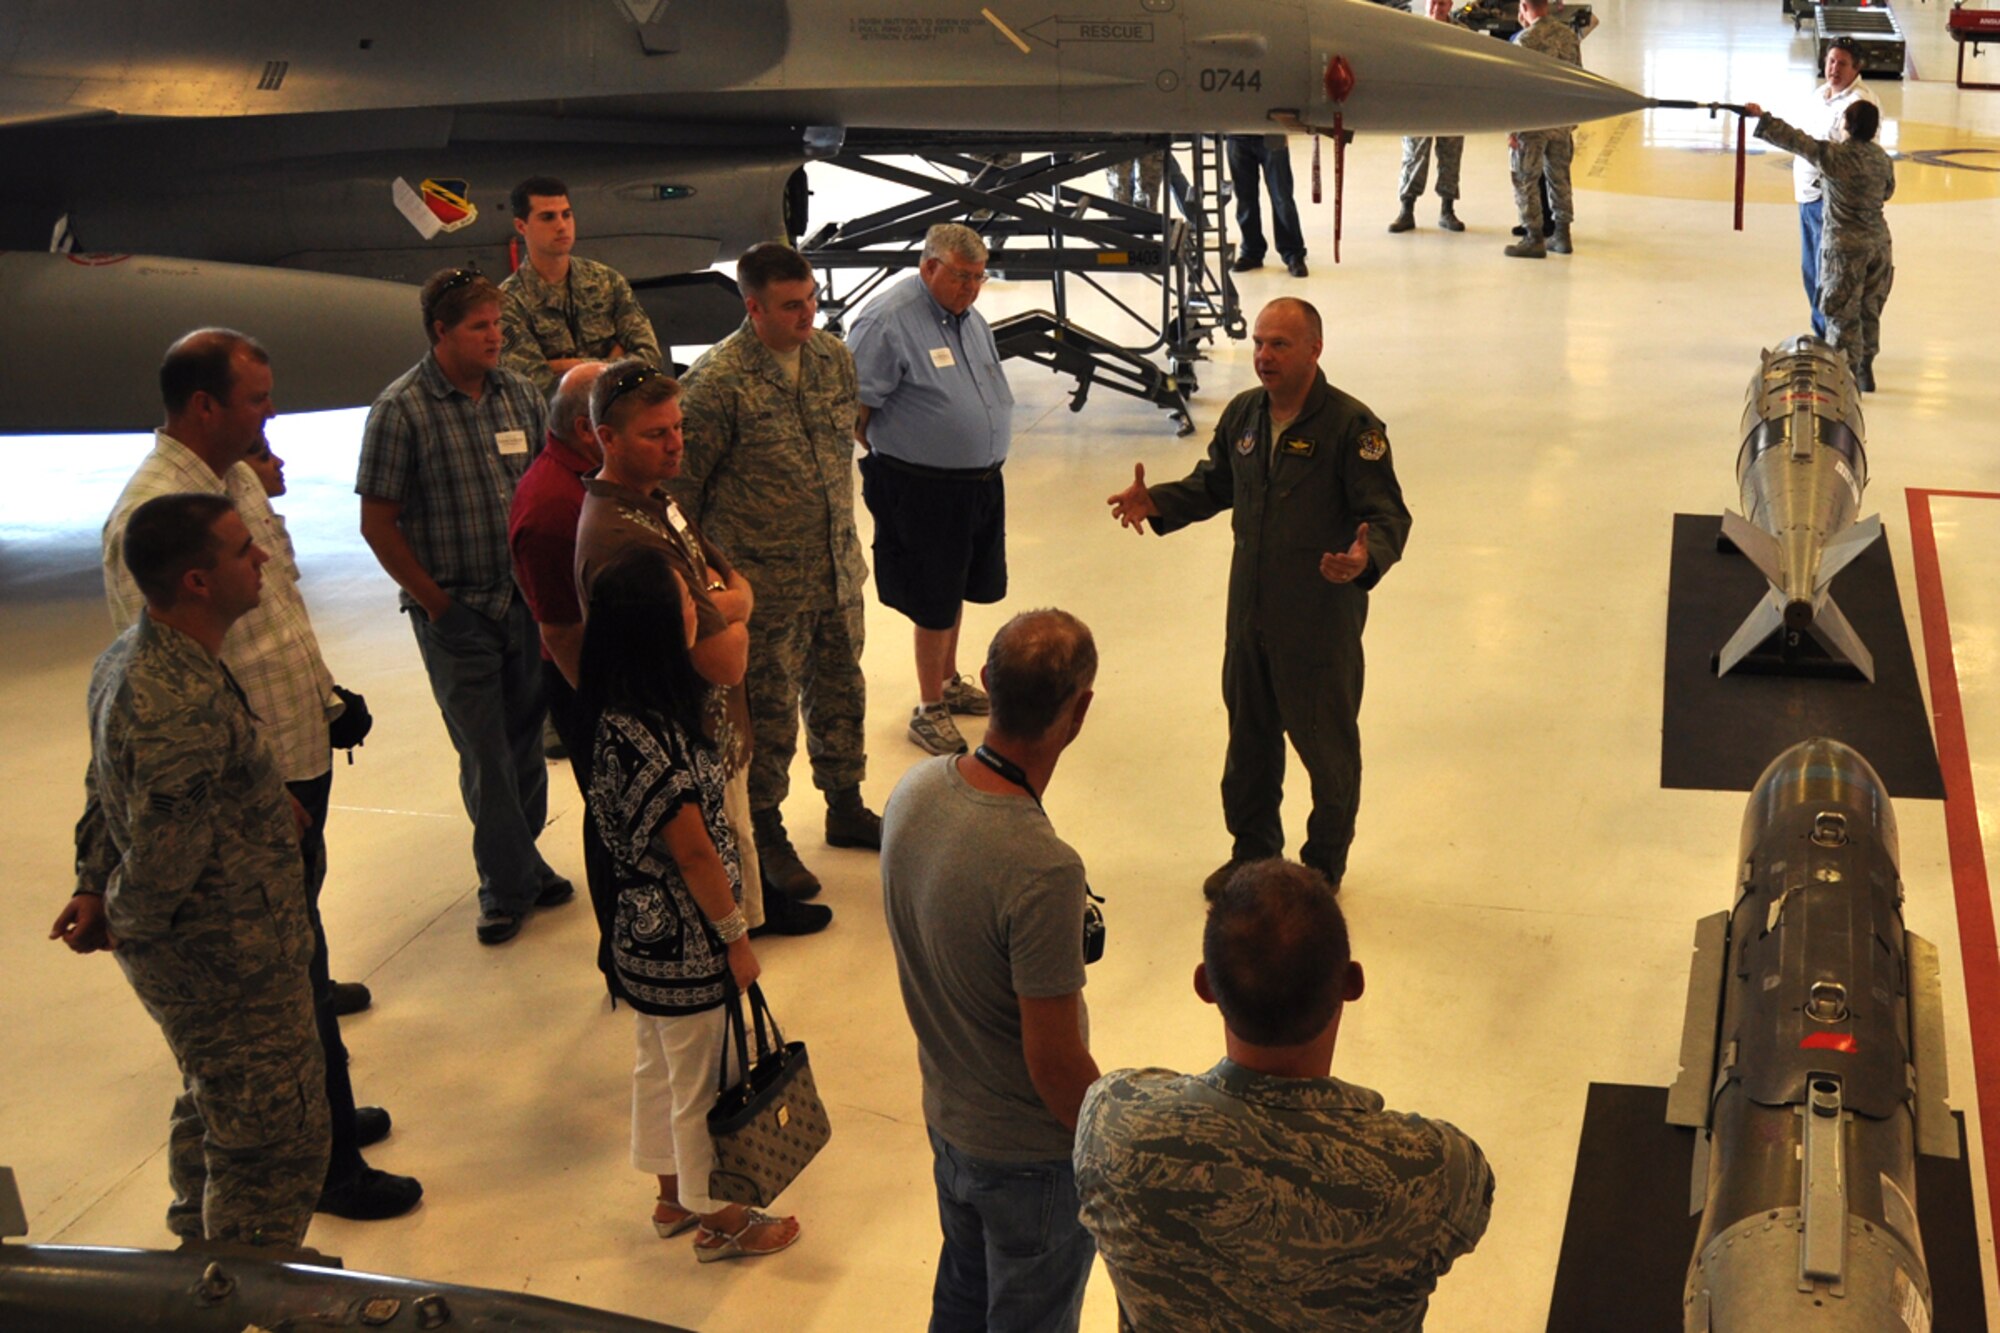 419th Fighter Wing pilot, Lt. Col. Andrew Chudy, showcases the F-16 and its capabilities to Employer Appreciation Day attendees Sunday. (U.S. Air Force photo/Staff Sgt. Heather Skinkle)